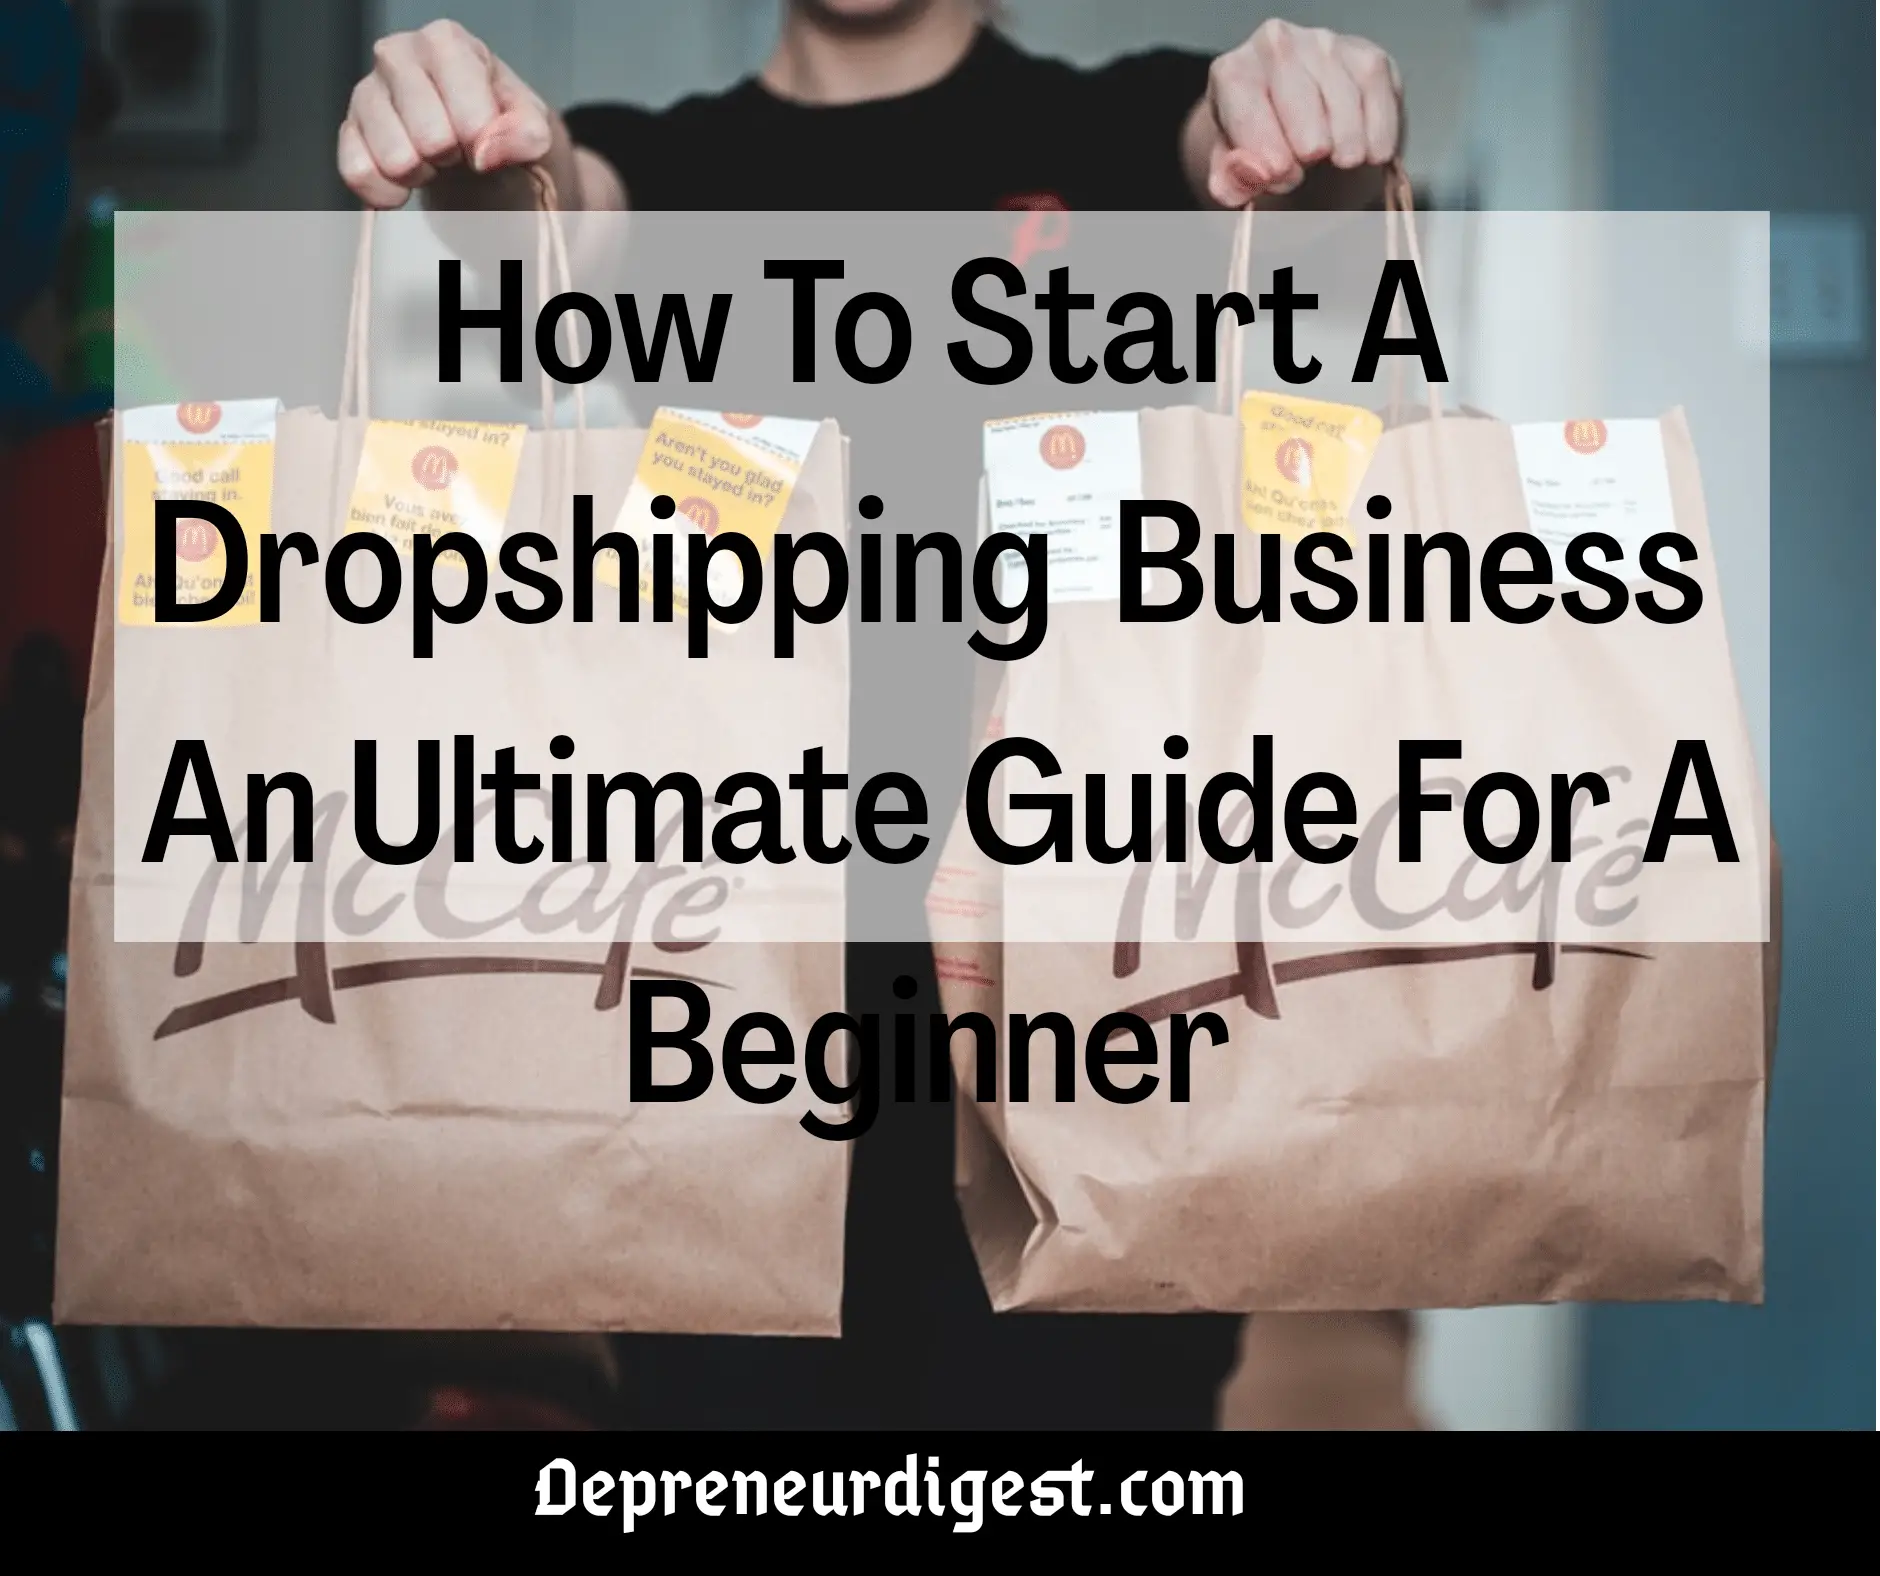 How to start a dropshipping business